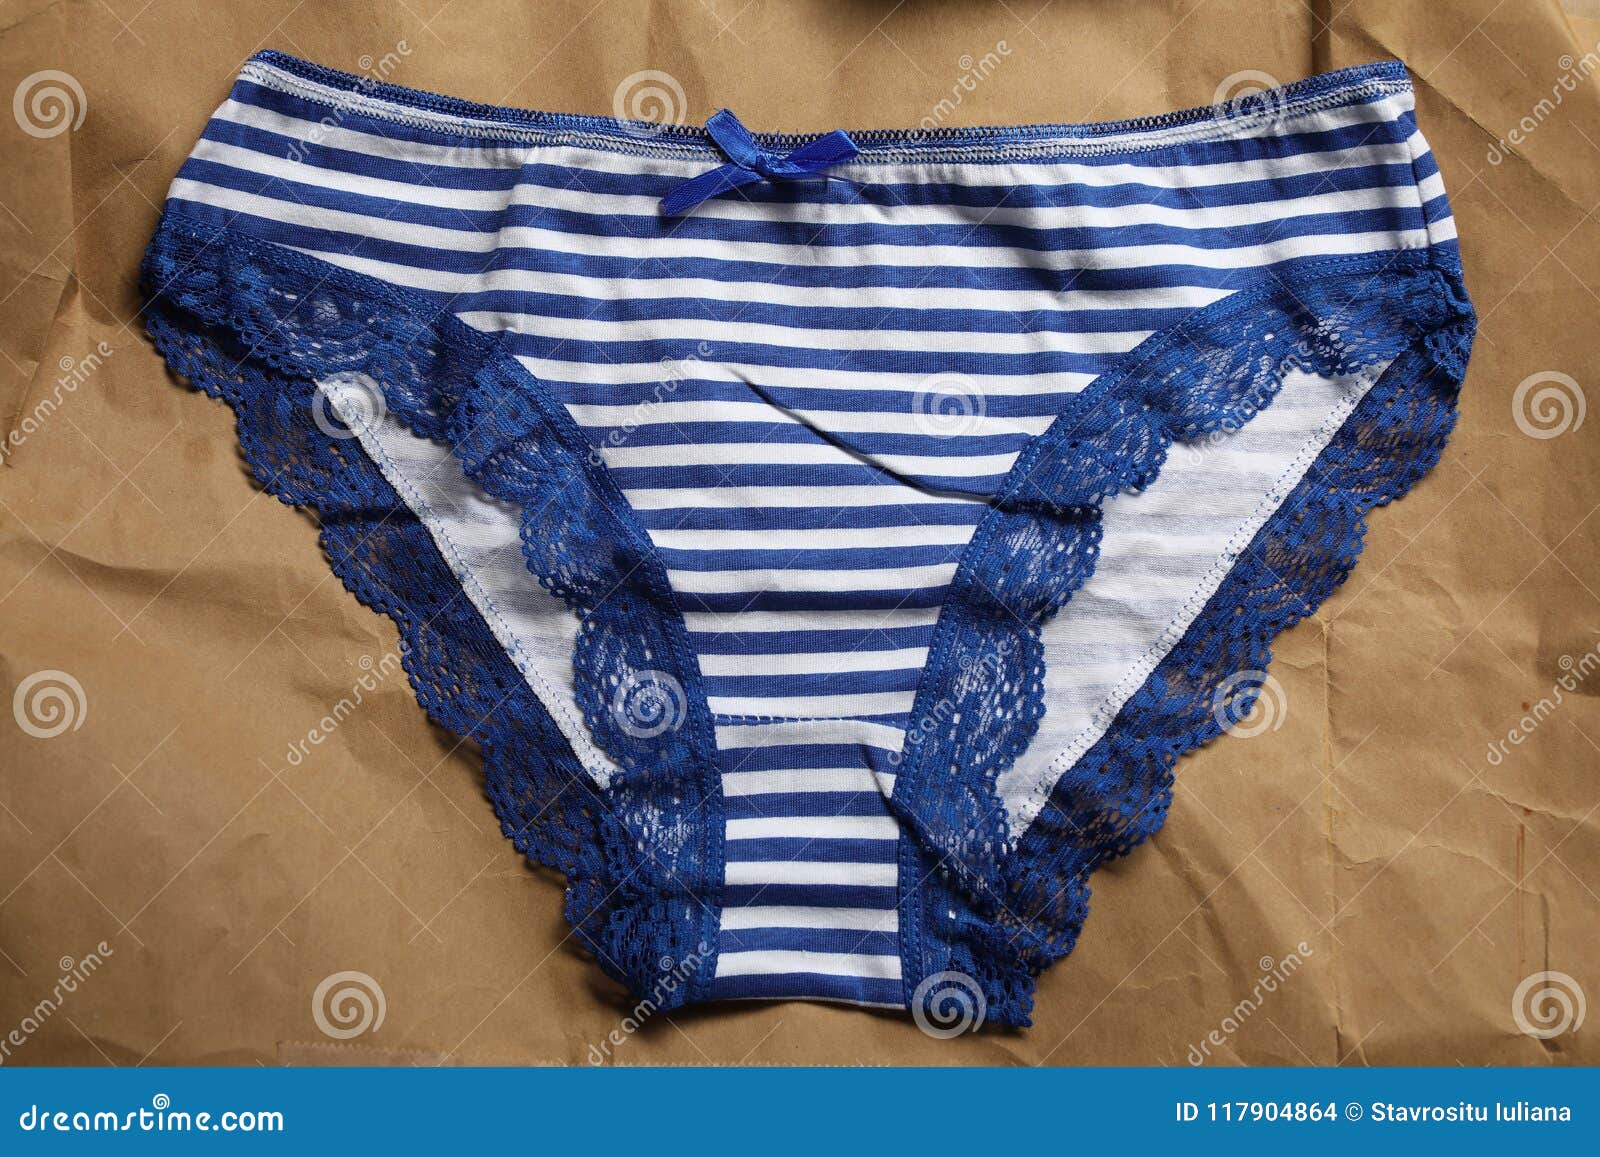 Blue and White Striped Panties Stock Photo - Image of colored